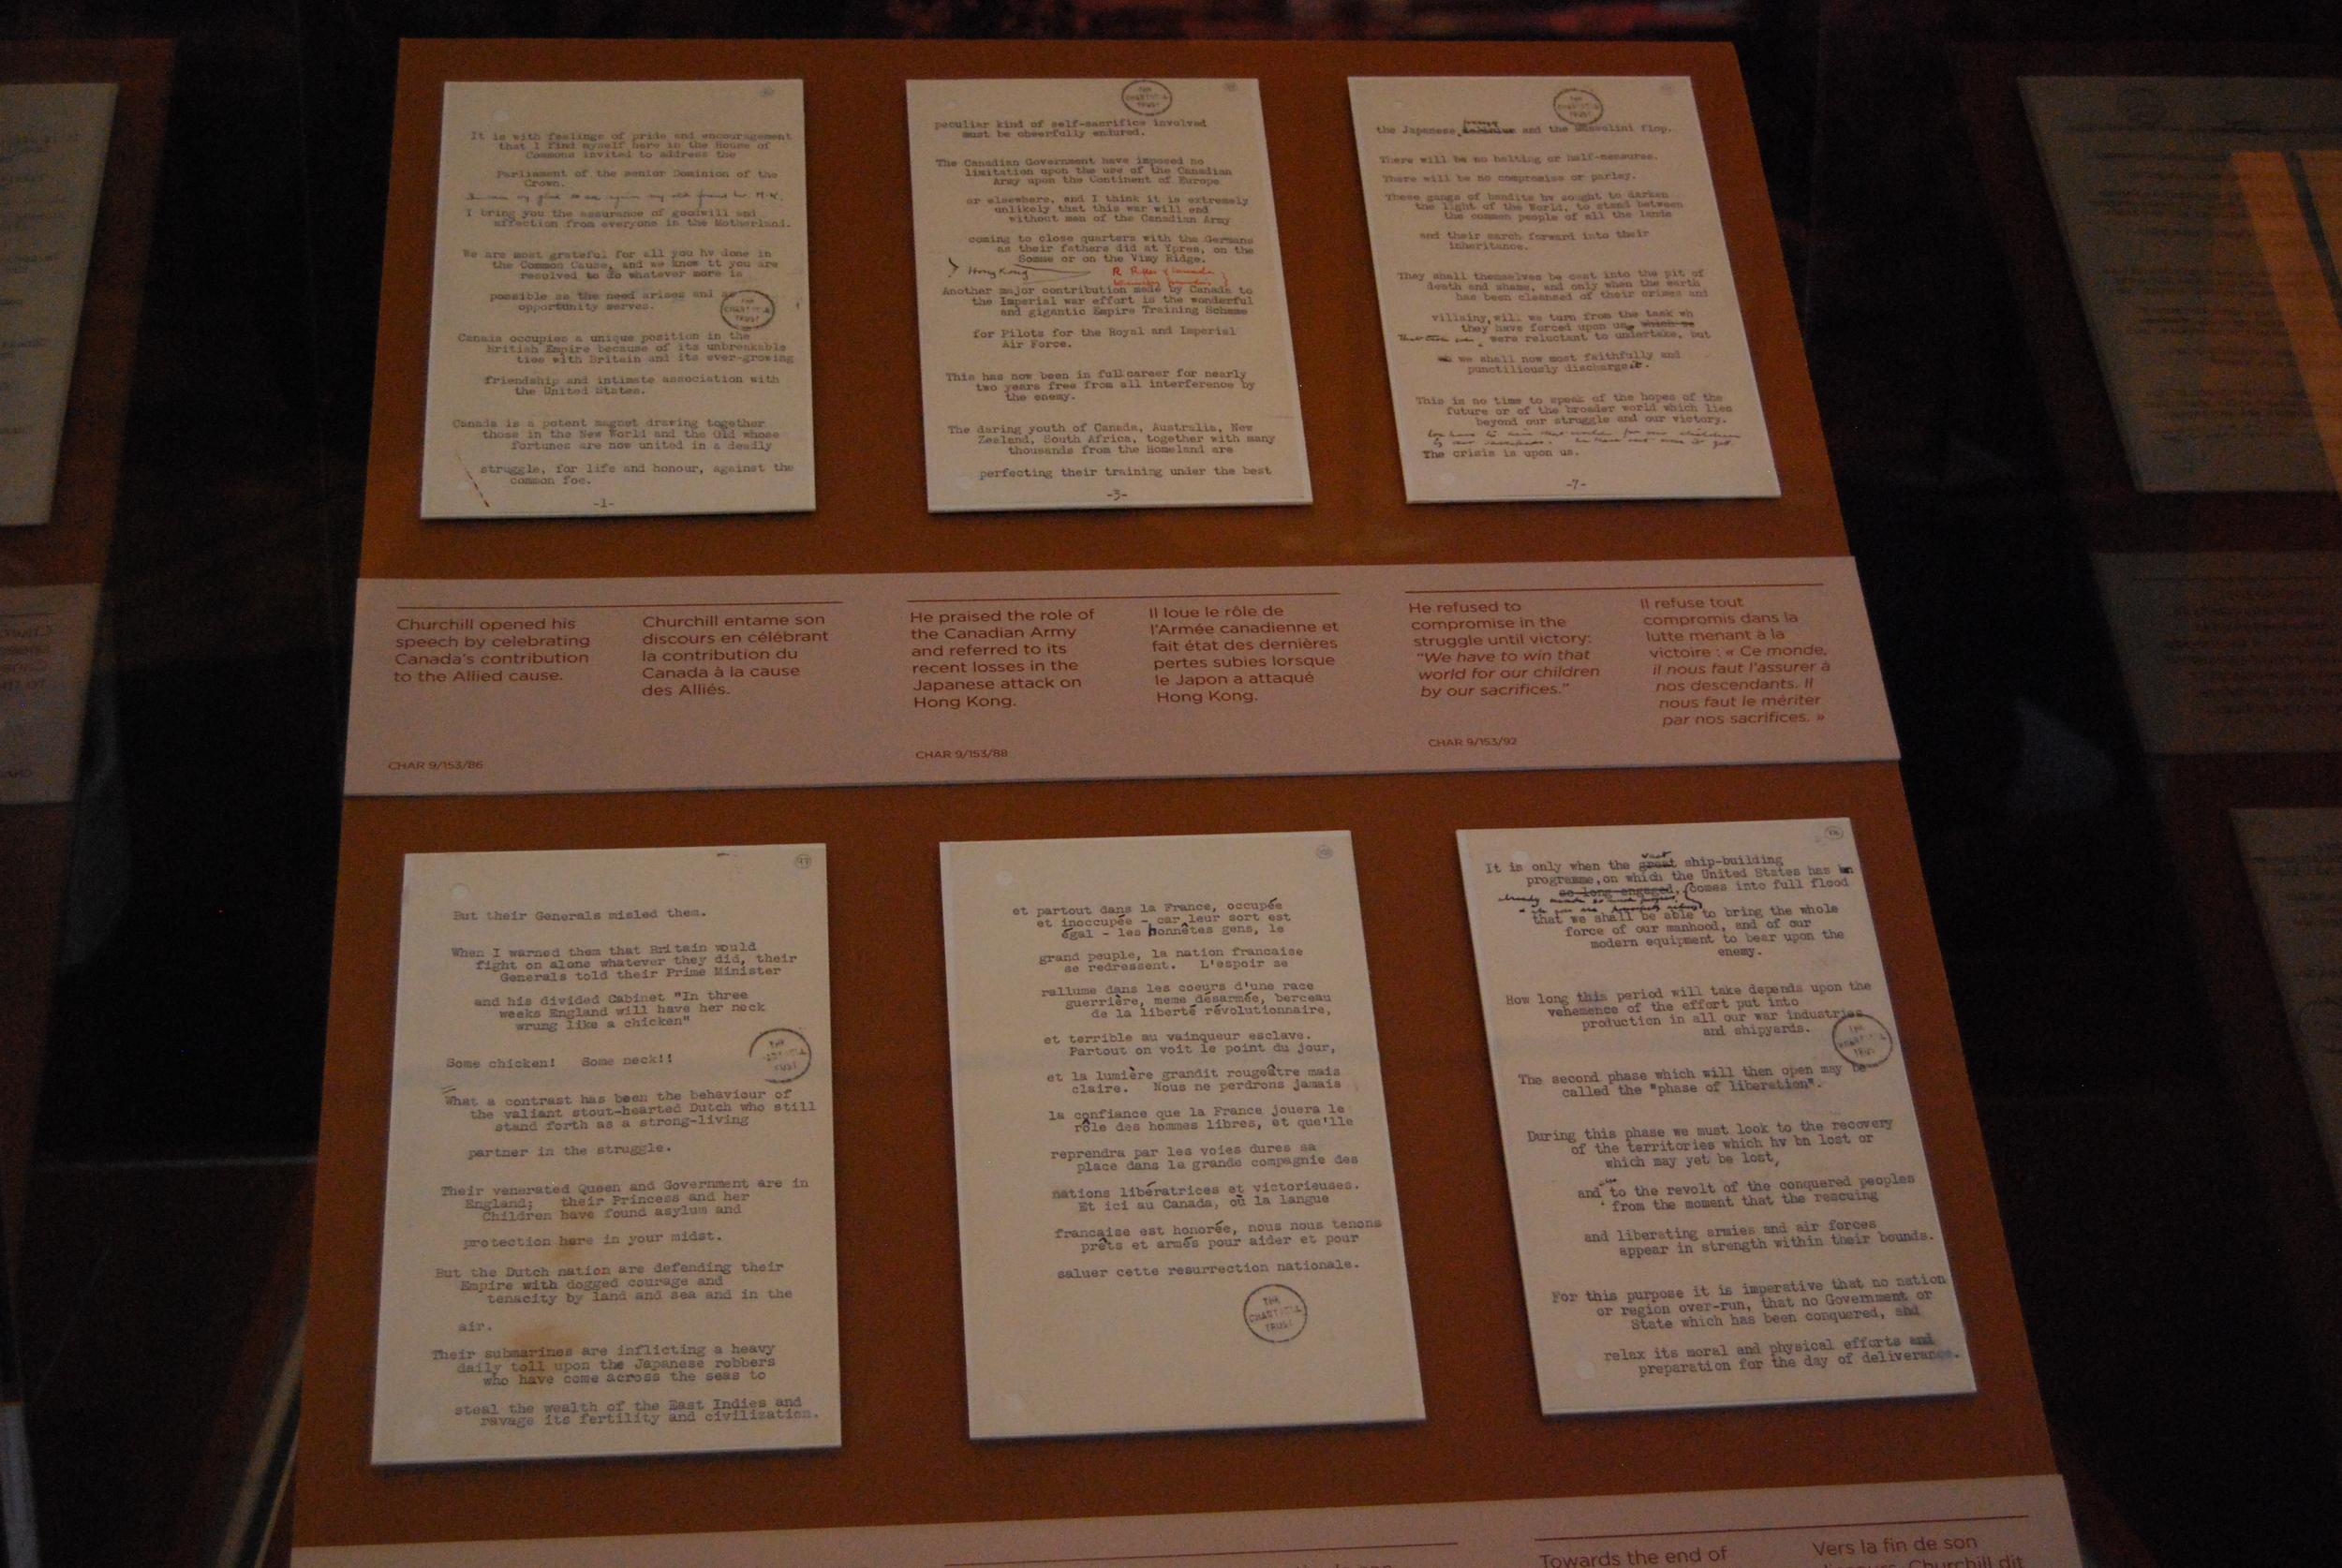 Six original pages from the December 30, 1941 speech